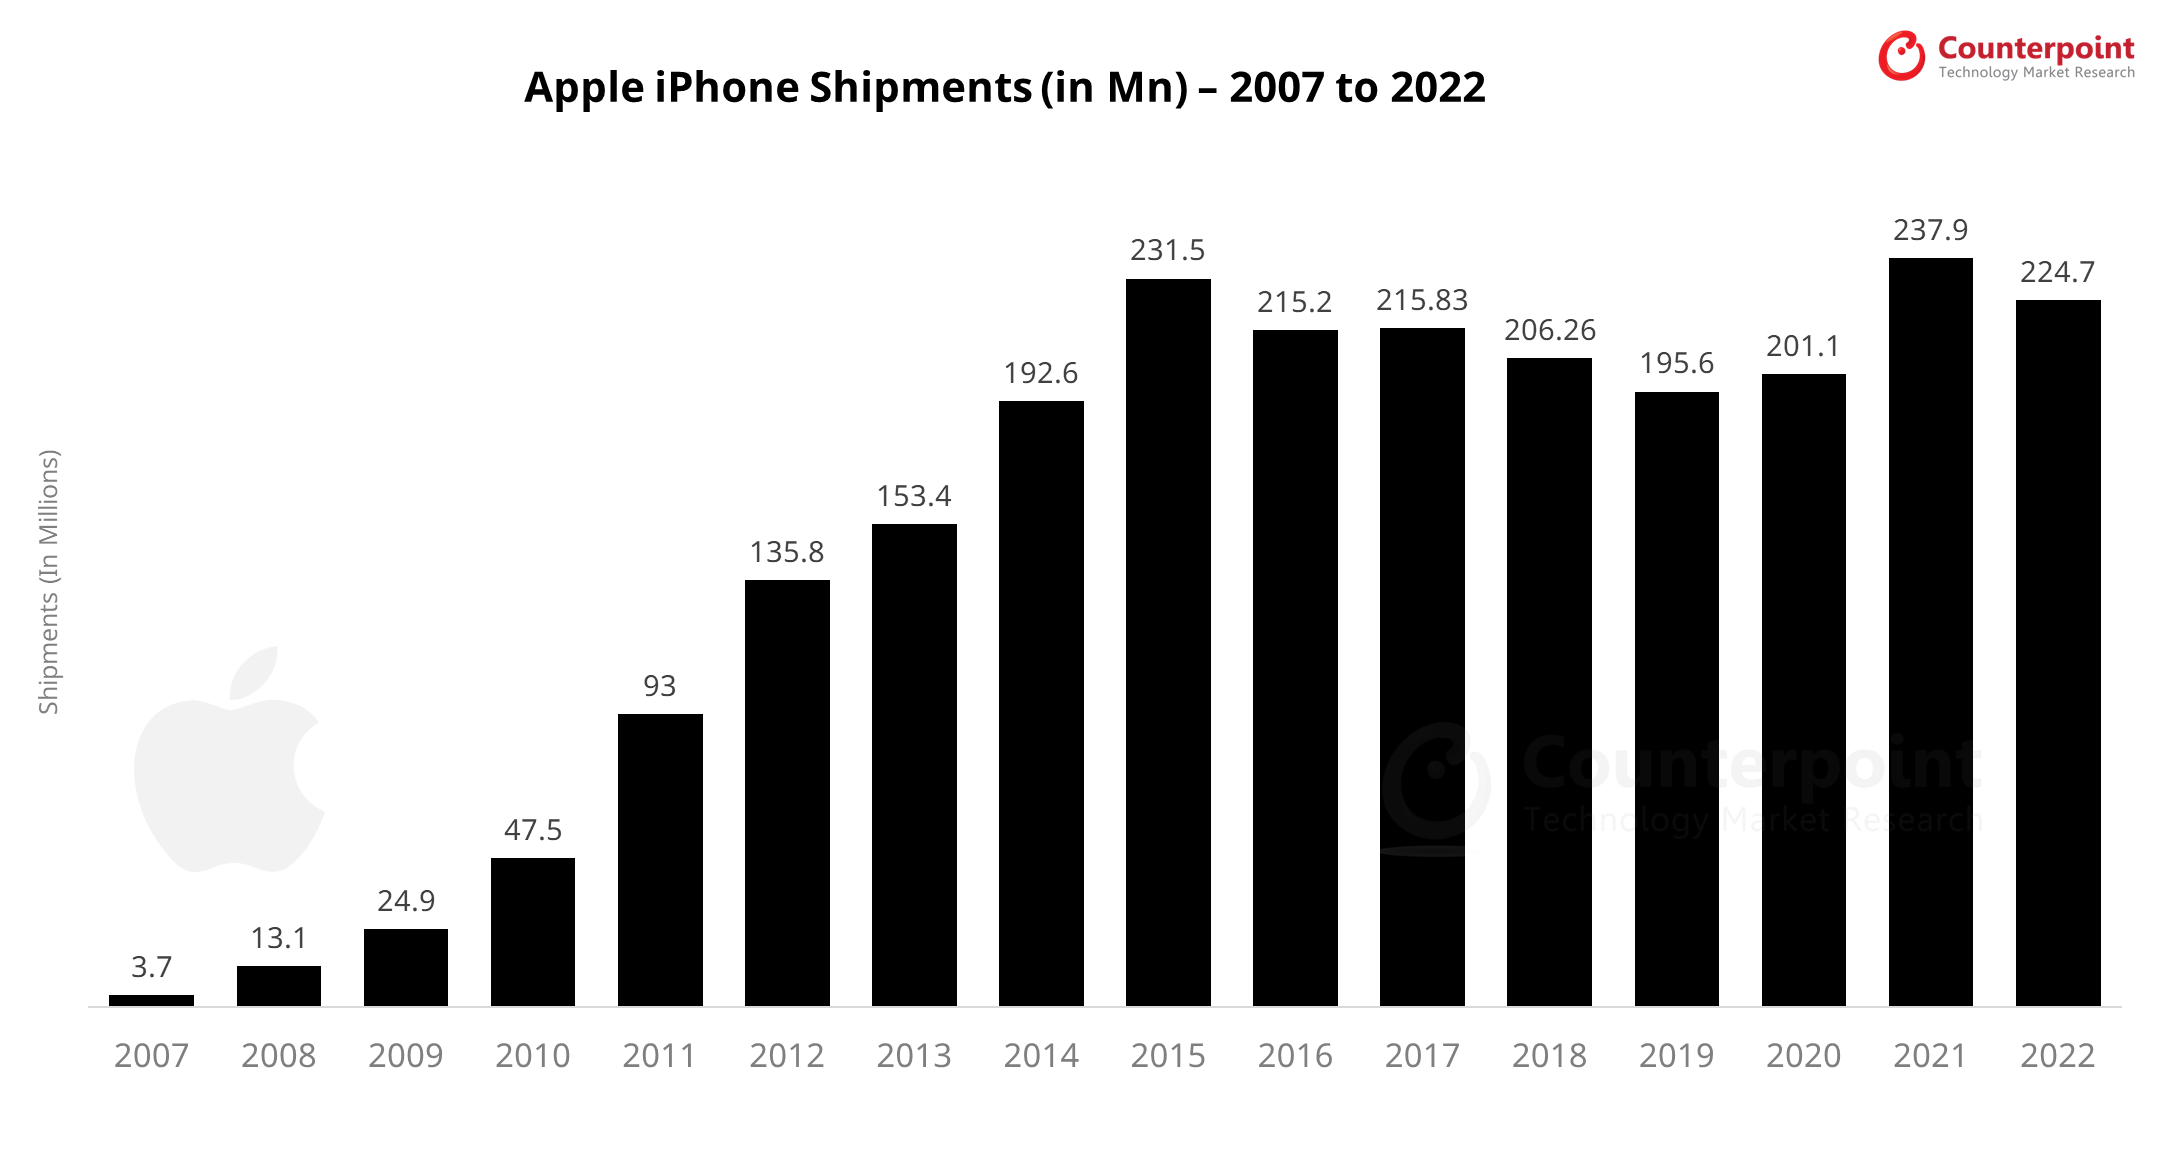 Counterpoint Apple iPhone Shipments 2022